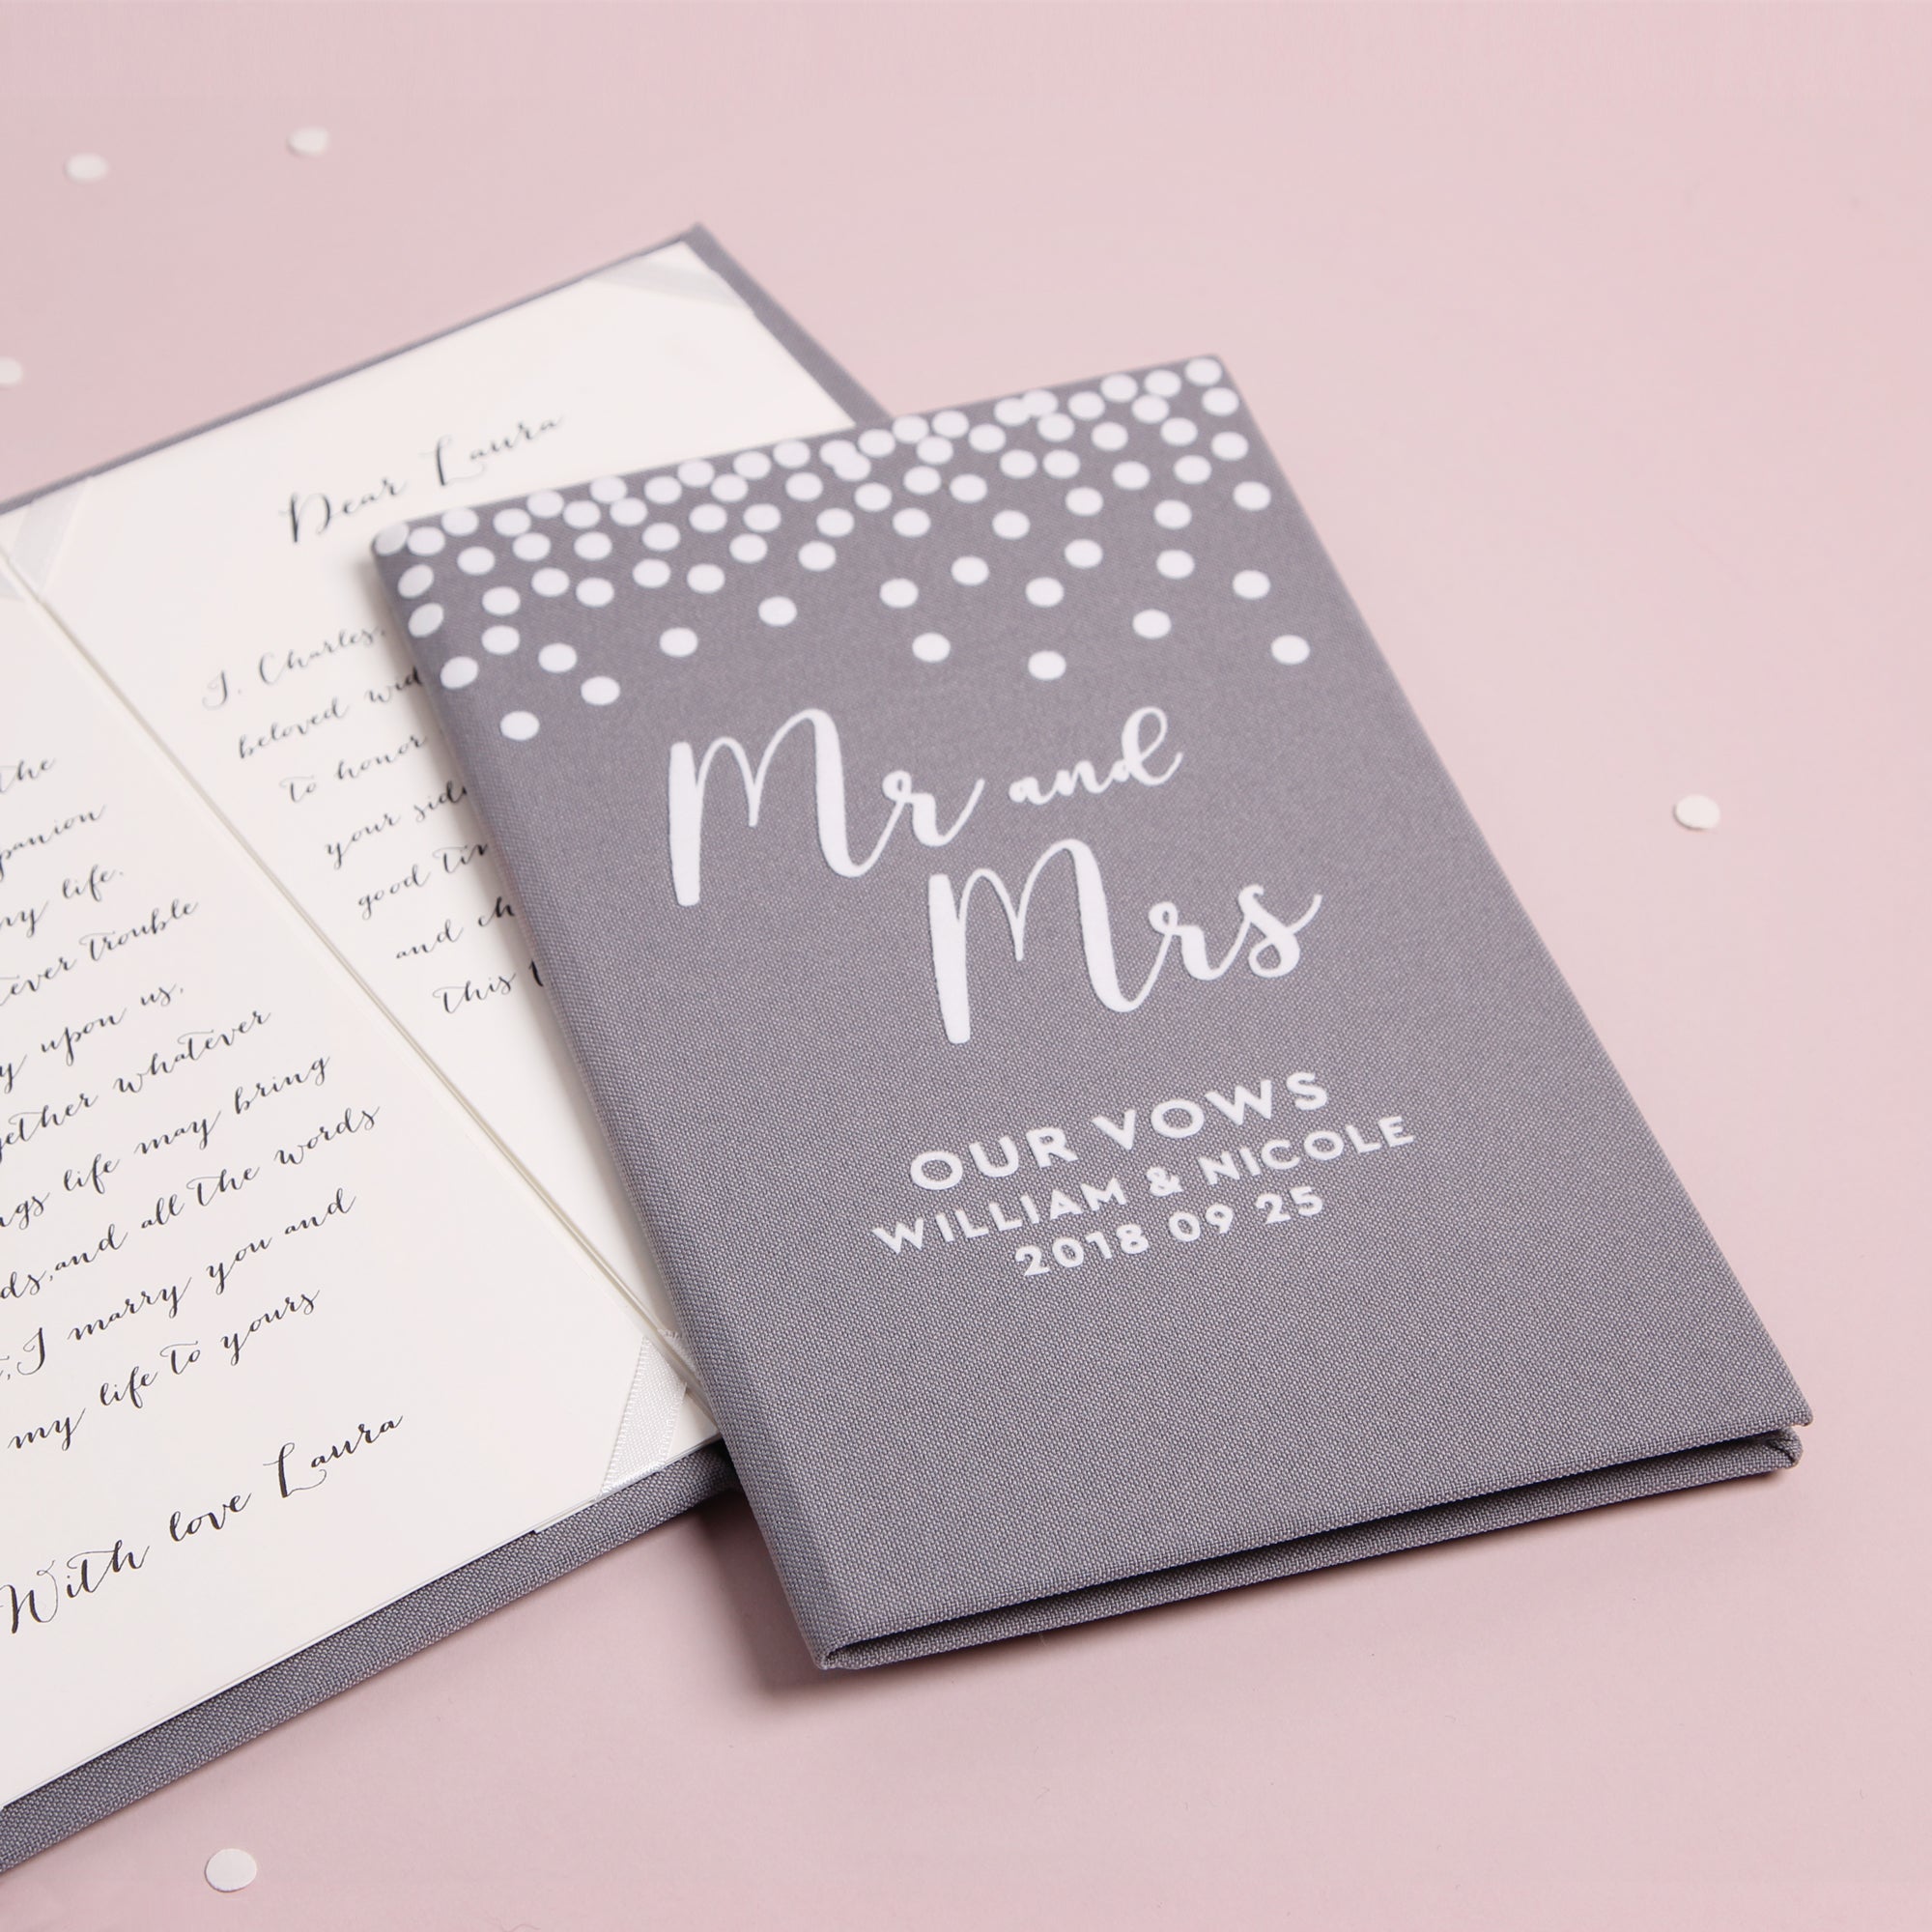 Personalized Wedding Vow Books White Velour Gray Dots Vows Bride and Groom Ceremony - Liumy 